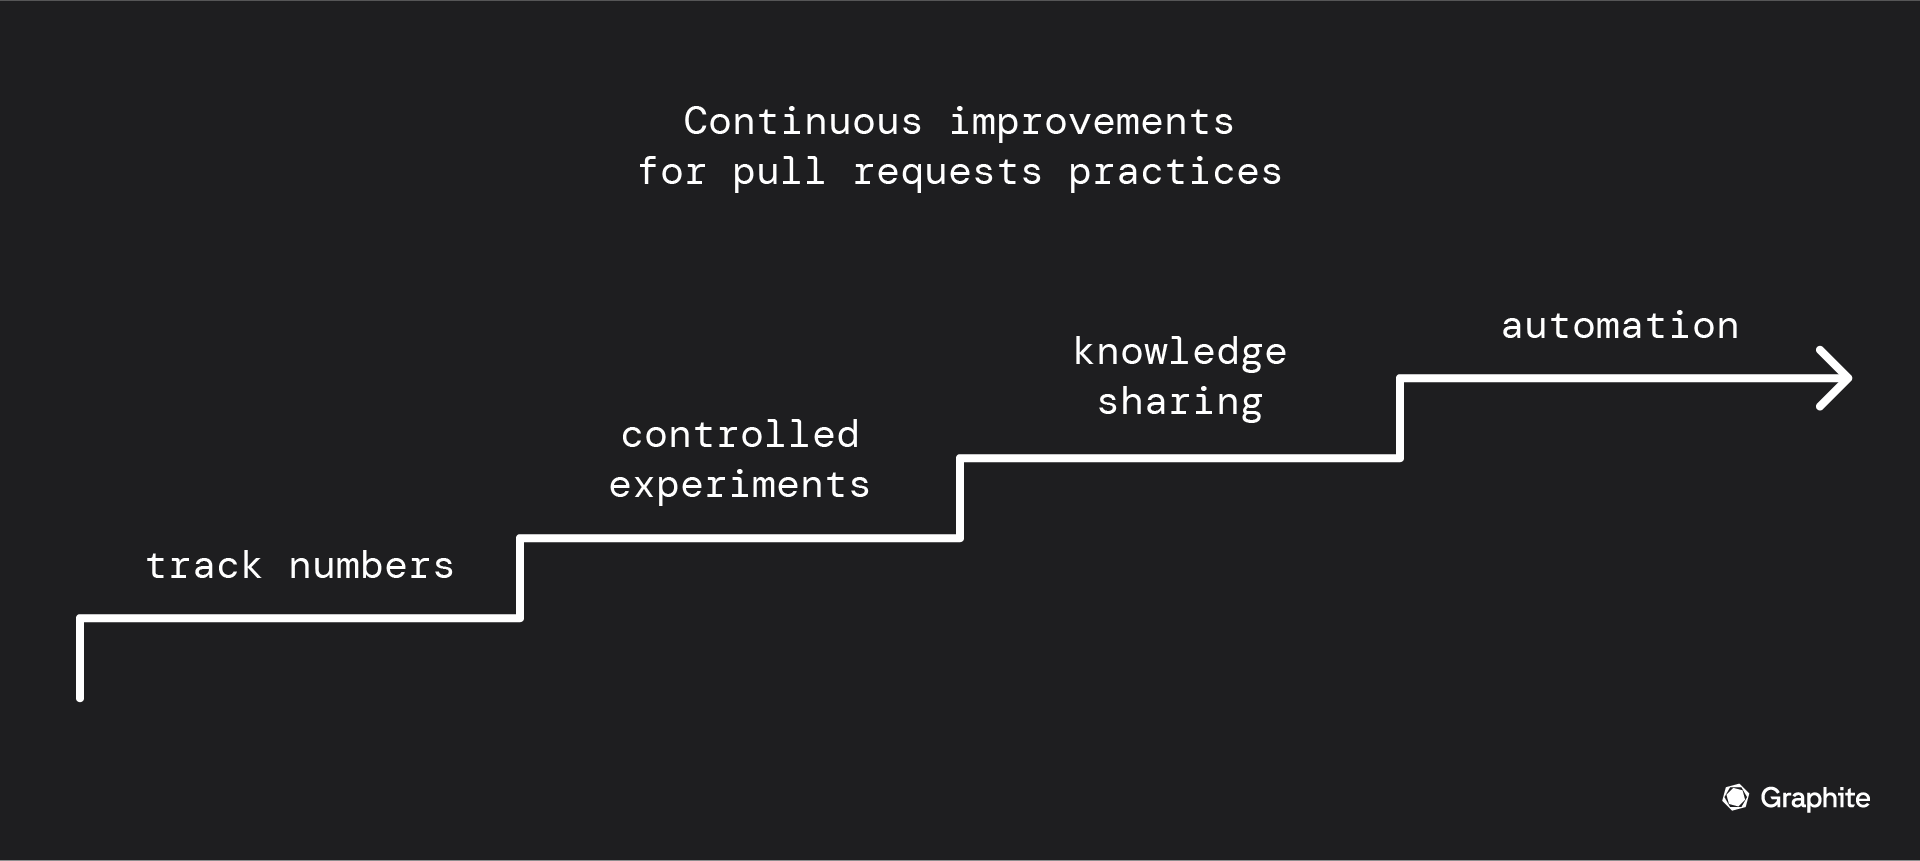 Continuous improvements for pull requests practice: track numbers; controlled experiments; knowledge sharing; automation